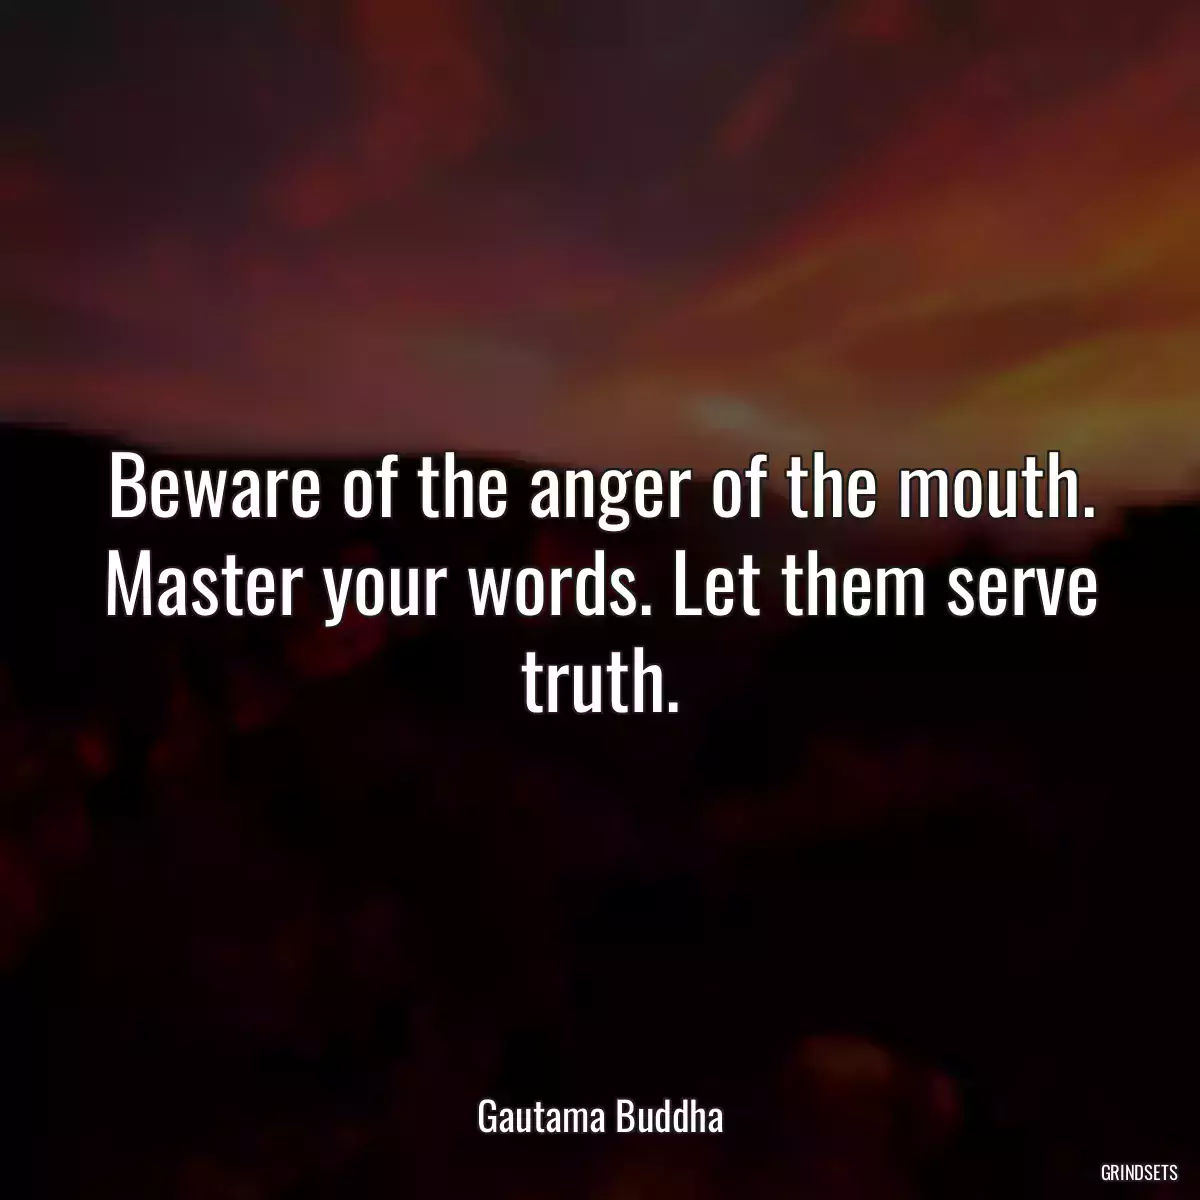 Beware of the anger of the mouth. Master your words. Let them serve truth.